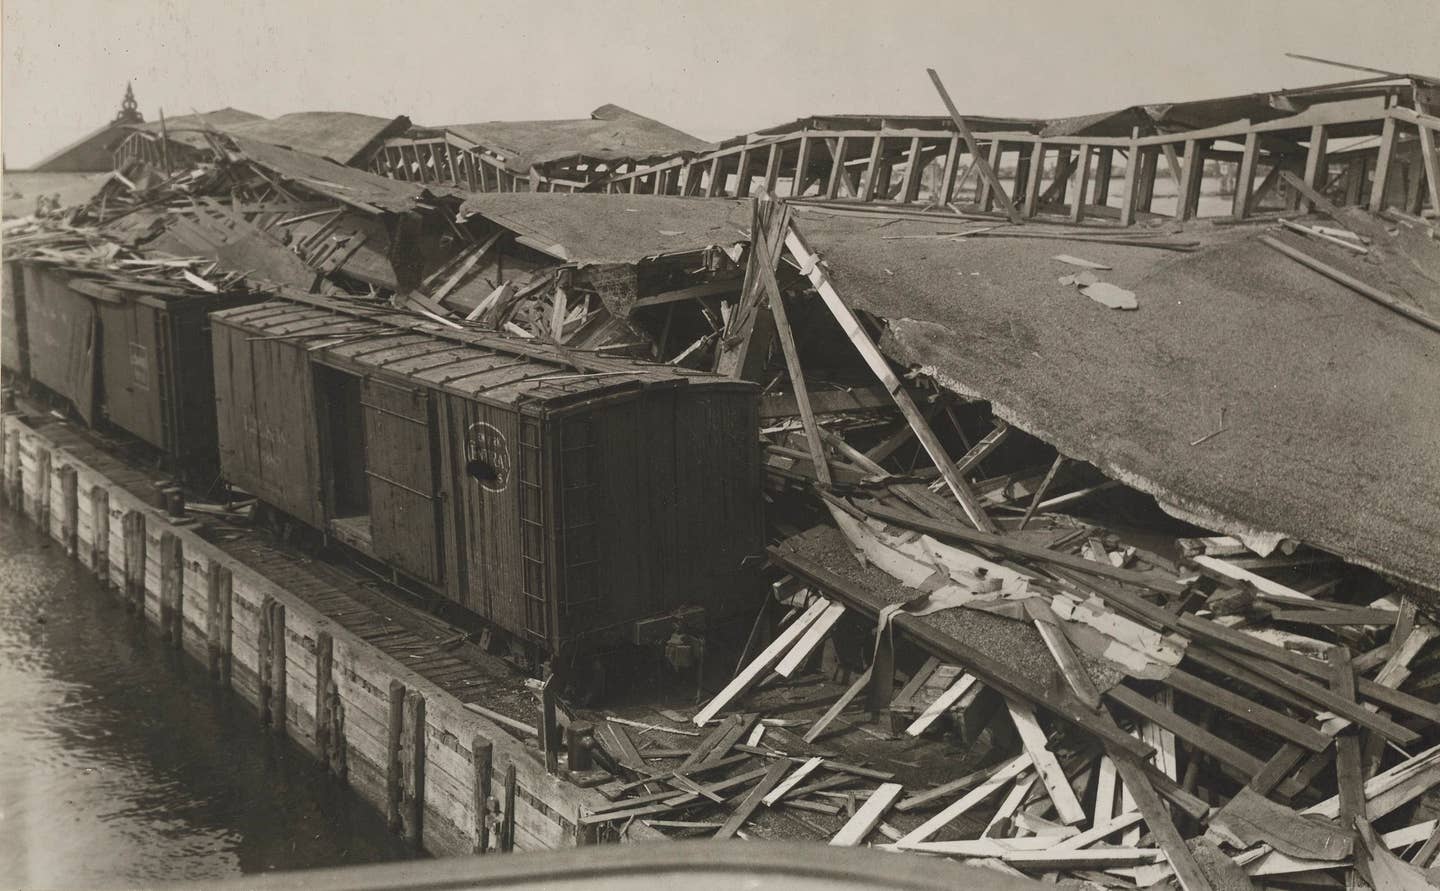 View of the debris of the Lehigh Valley pier wrecked by an explosion of munitions on Black Tom Island, New Jersey. Five dead and $25,000,000 worth ($500,000,000 in 2018) of property destroyed.